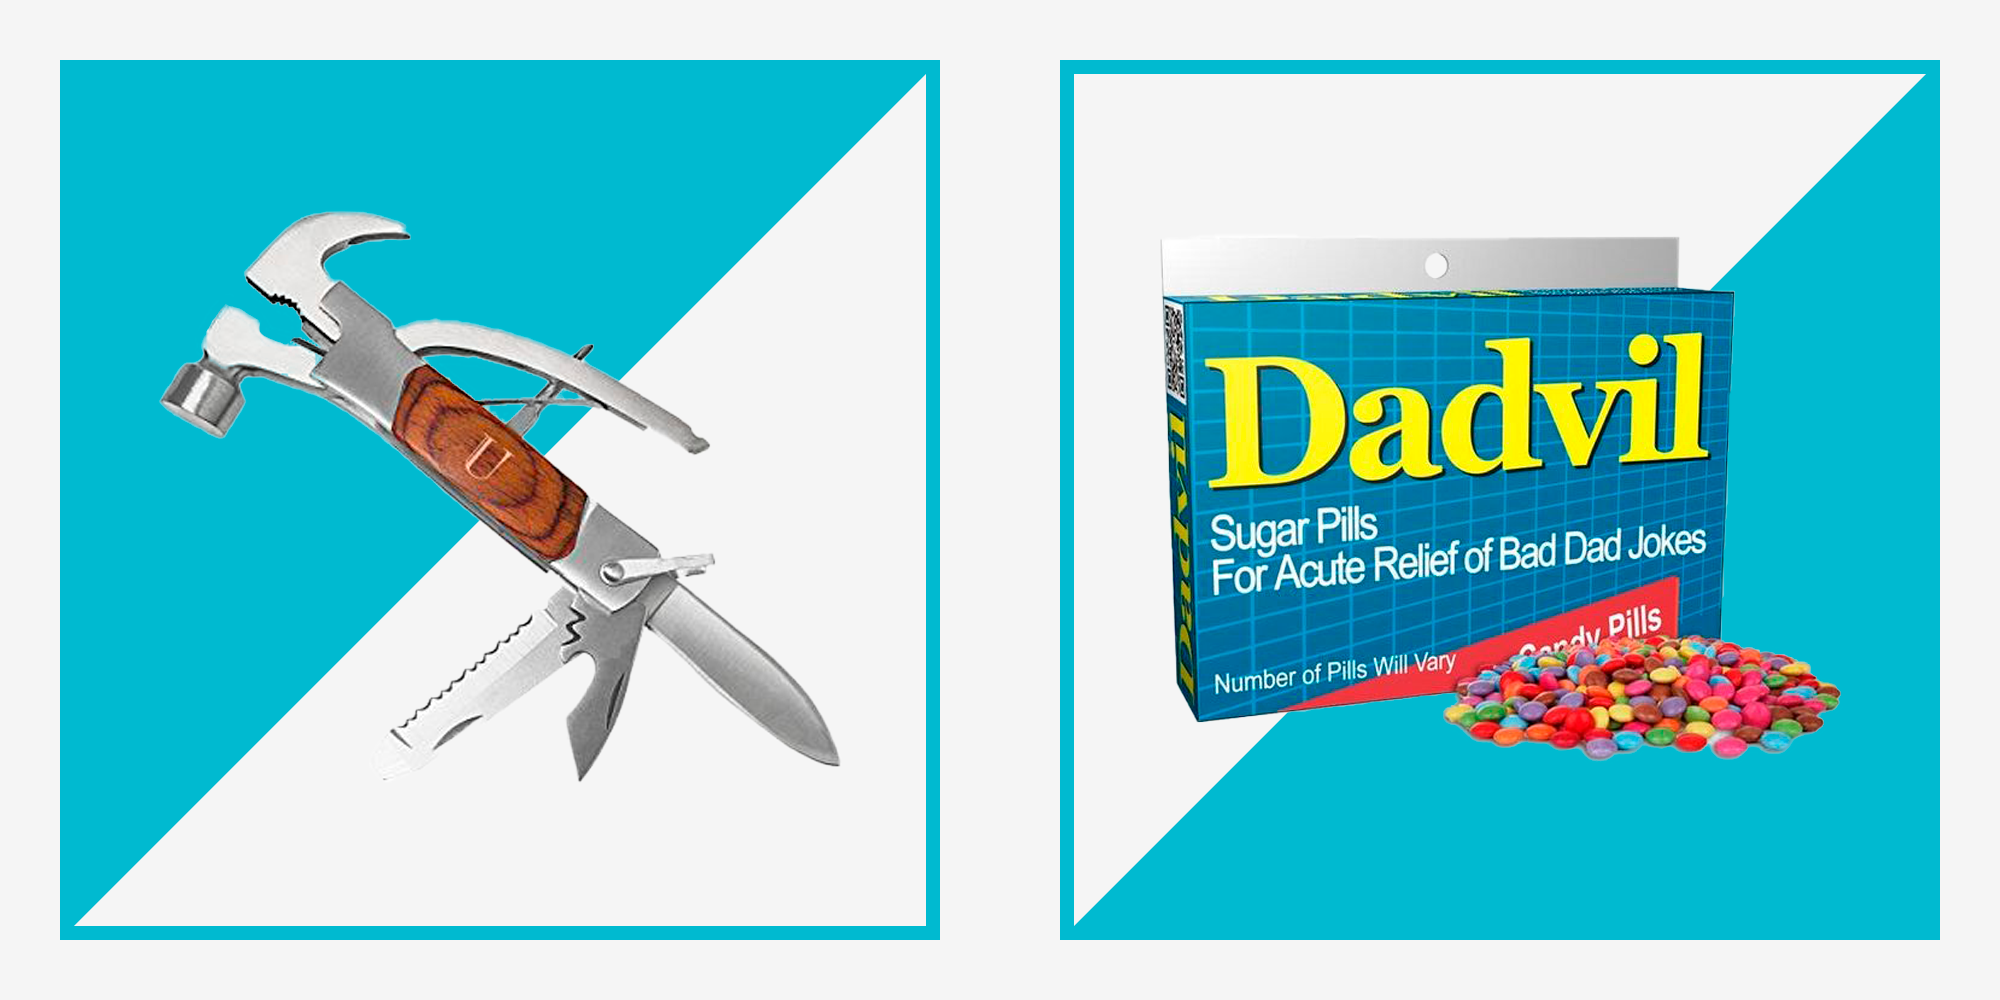 best father's day gifts for new dad